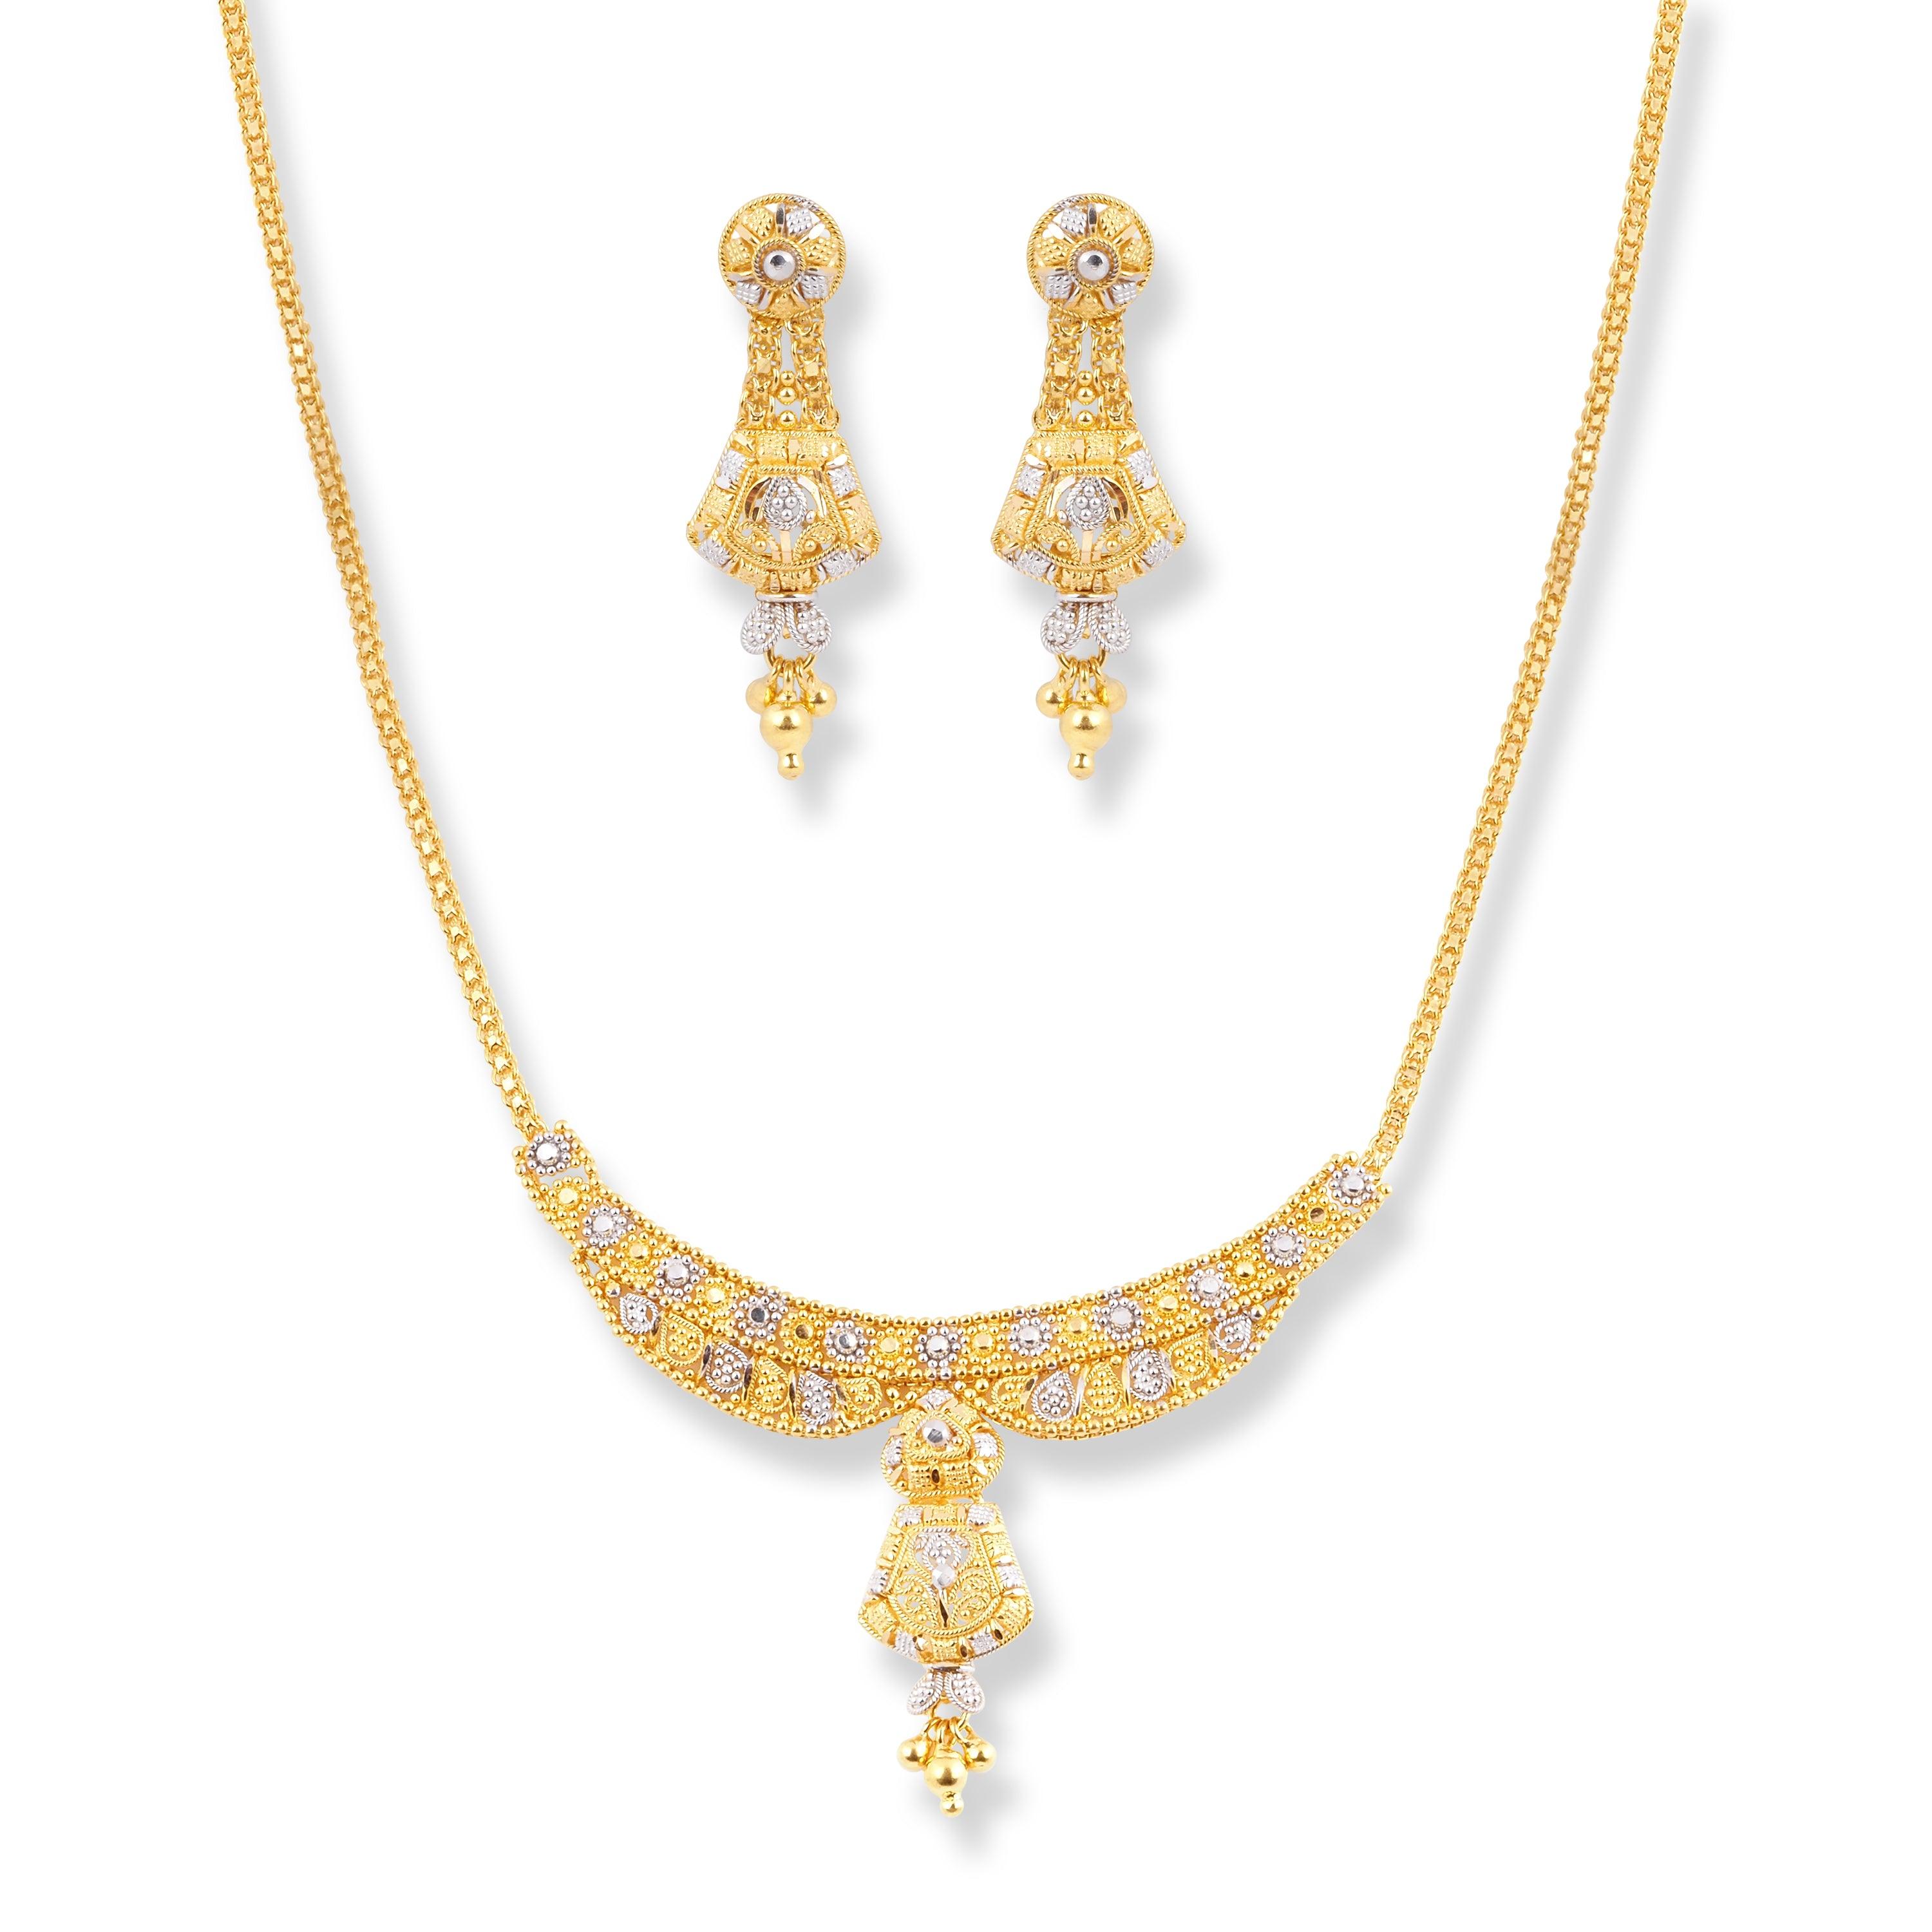 22ct Yellow Gold Necklace & Earring Set With Rhodium Plating Design N-7060 E-7060A - Minar Jewellers